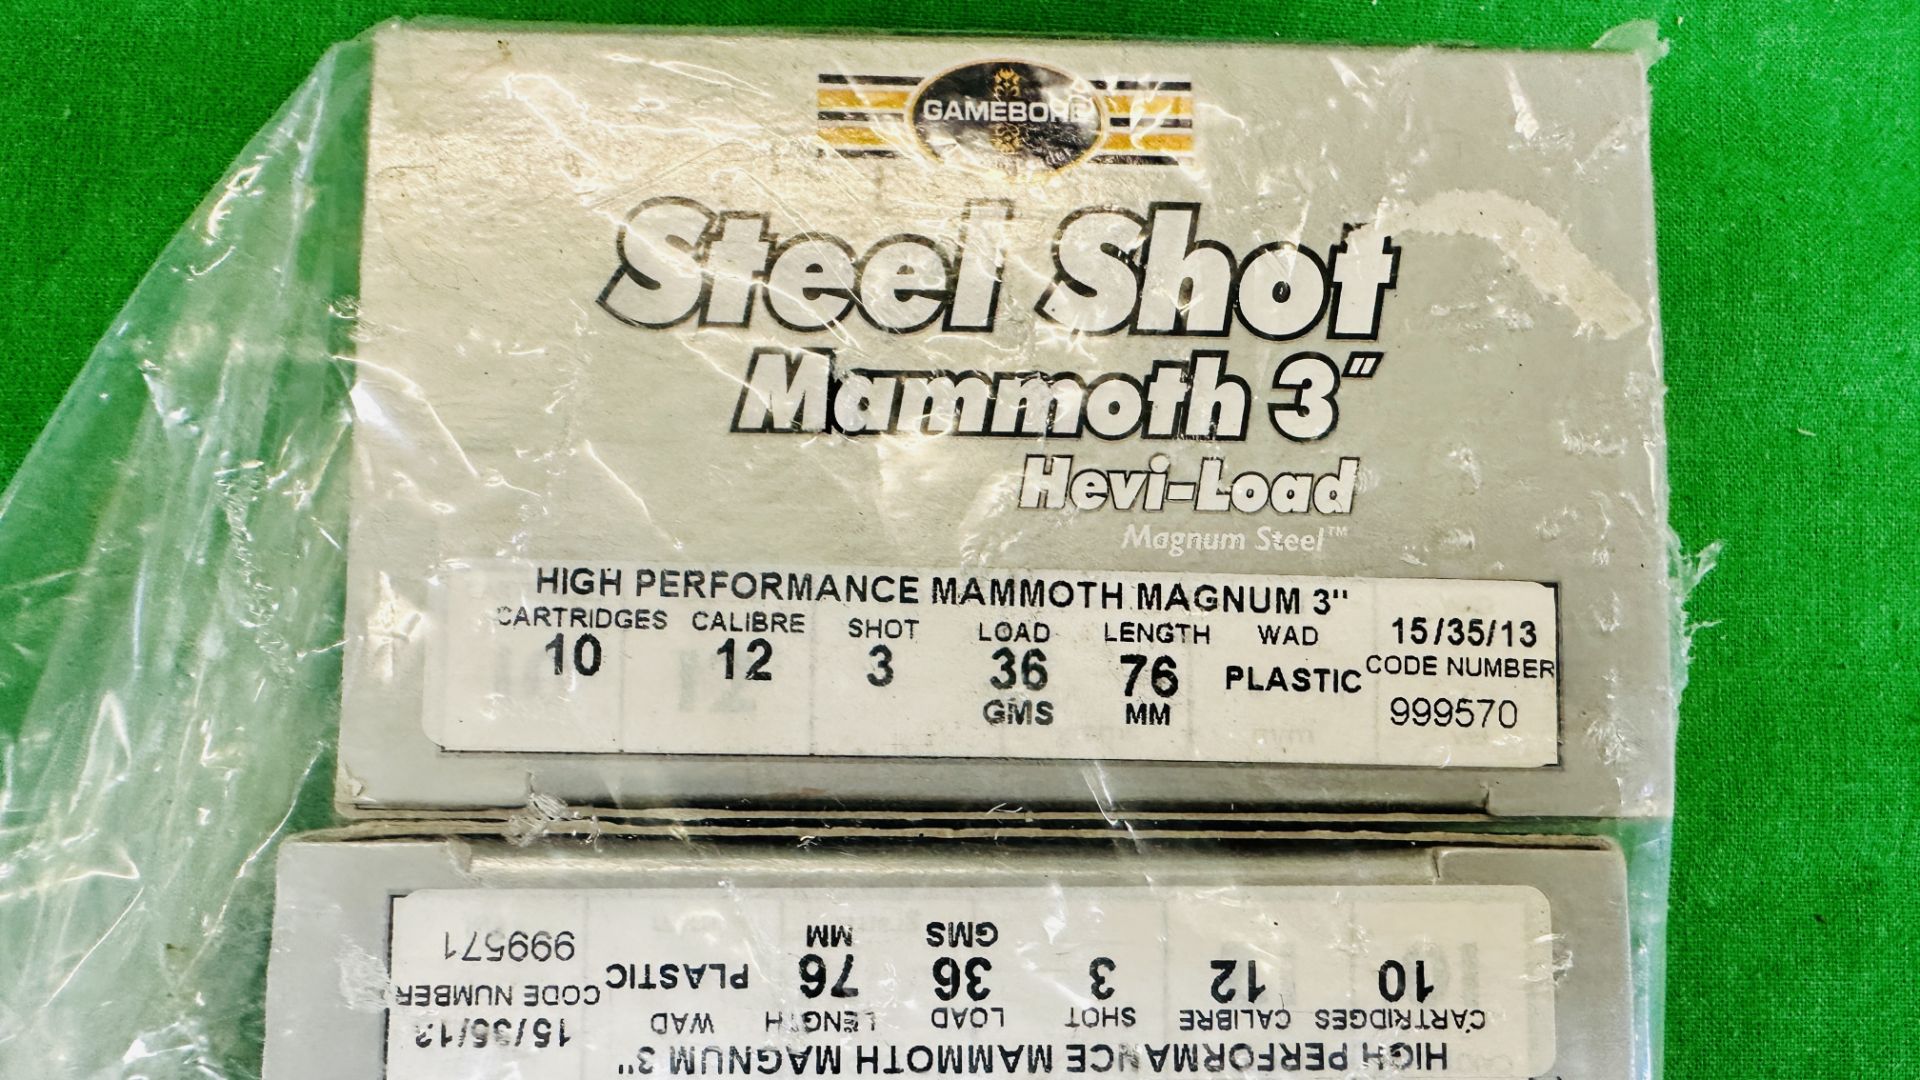 30 X GAMEBORE STEEL SHOT MAMMOTH HEVI LOAD MAGNUM STEEL 3" 36GRM 3 SHOT CARTRIDGES - (TO BE - Image 2 of 3